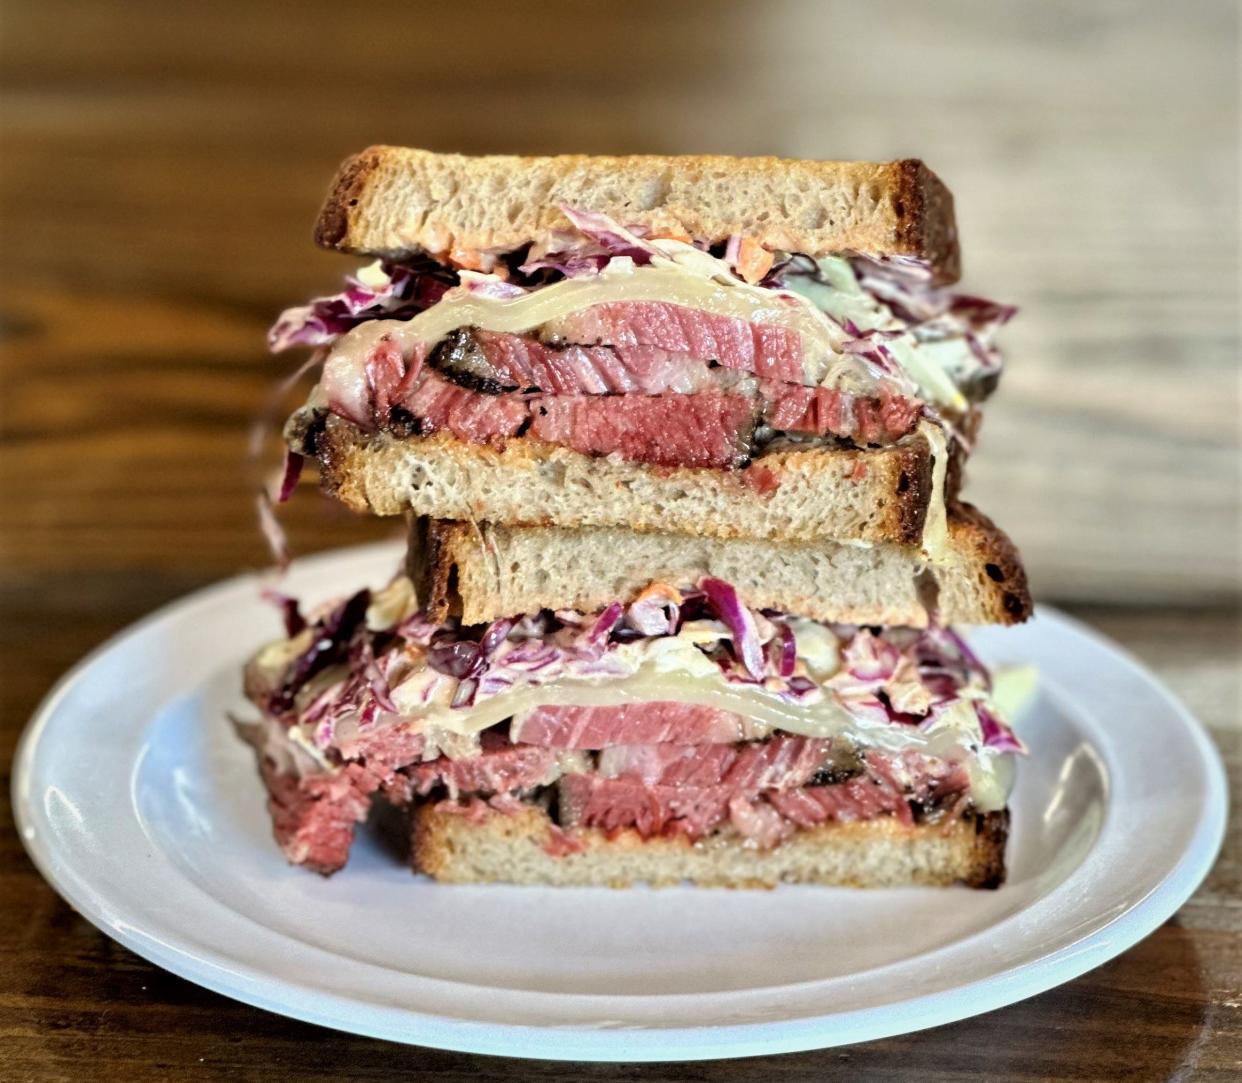 Mum Foods sells its pastrami at the farmers market, but at their deli, the smoked meat is stacked high and layered with cheese and slaw for the awesome Rachel sandwich.